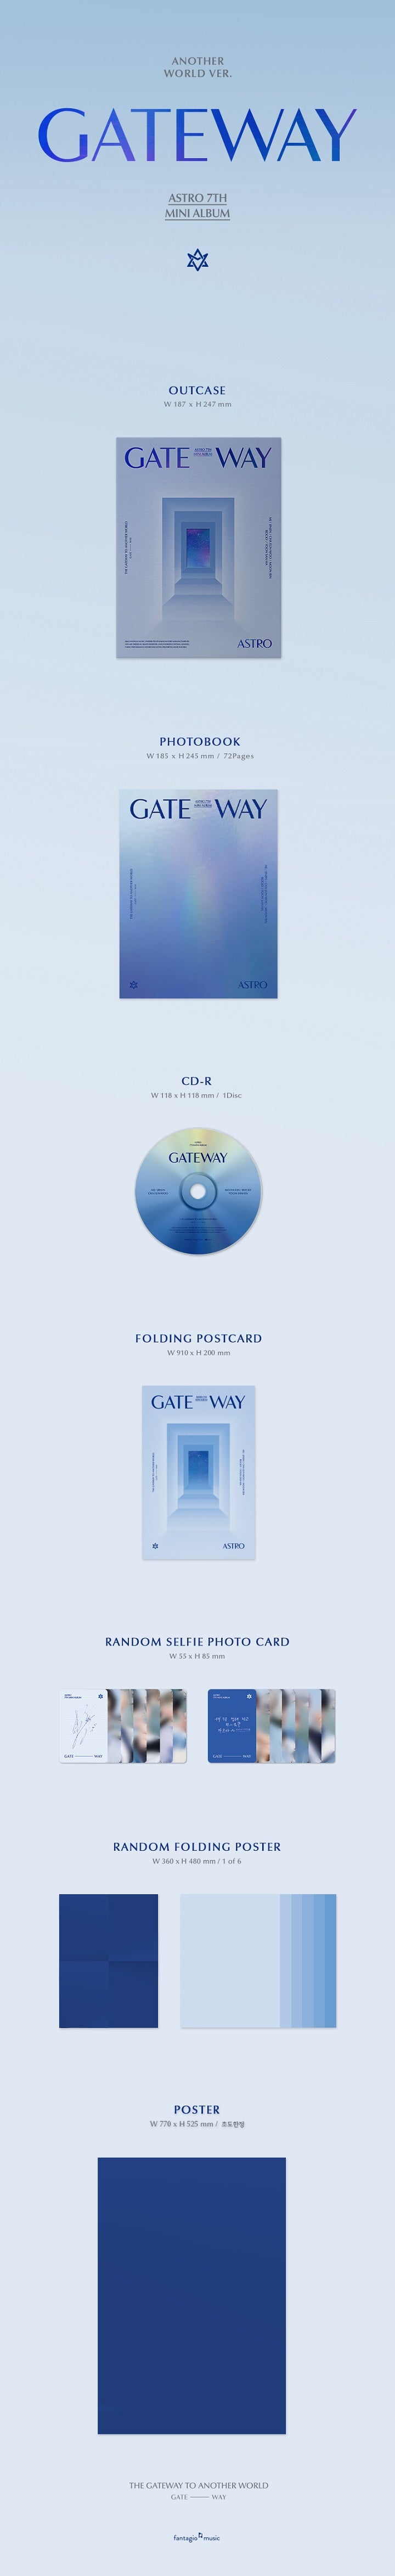 1 CD
1 Photo Book (72 pages)
1 Folding Postcard
1 Selfie Photo Card
1 Folding Poster (random out of 6 types)